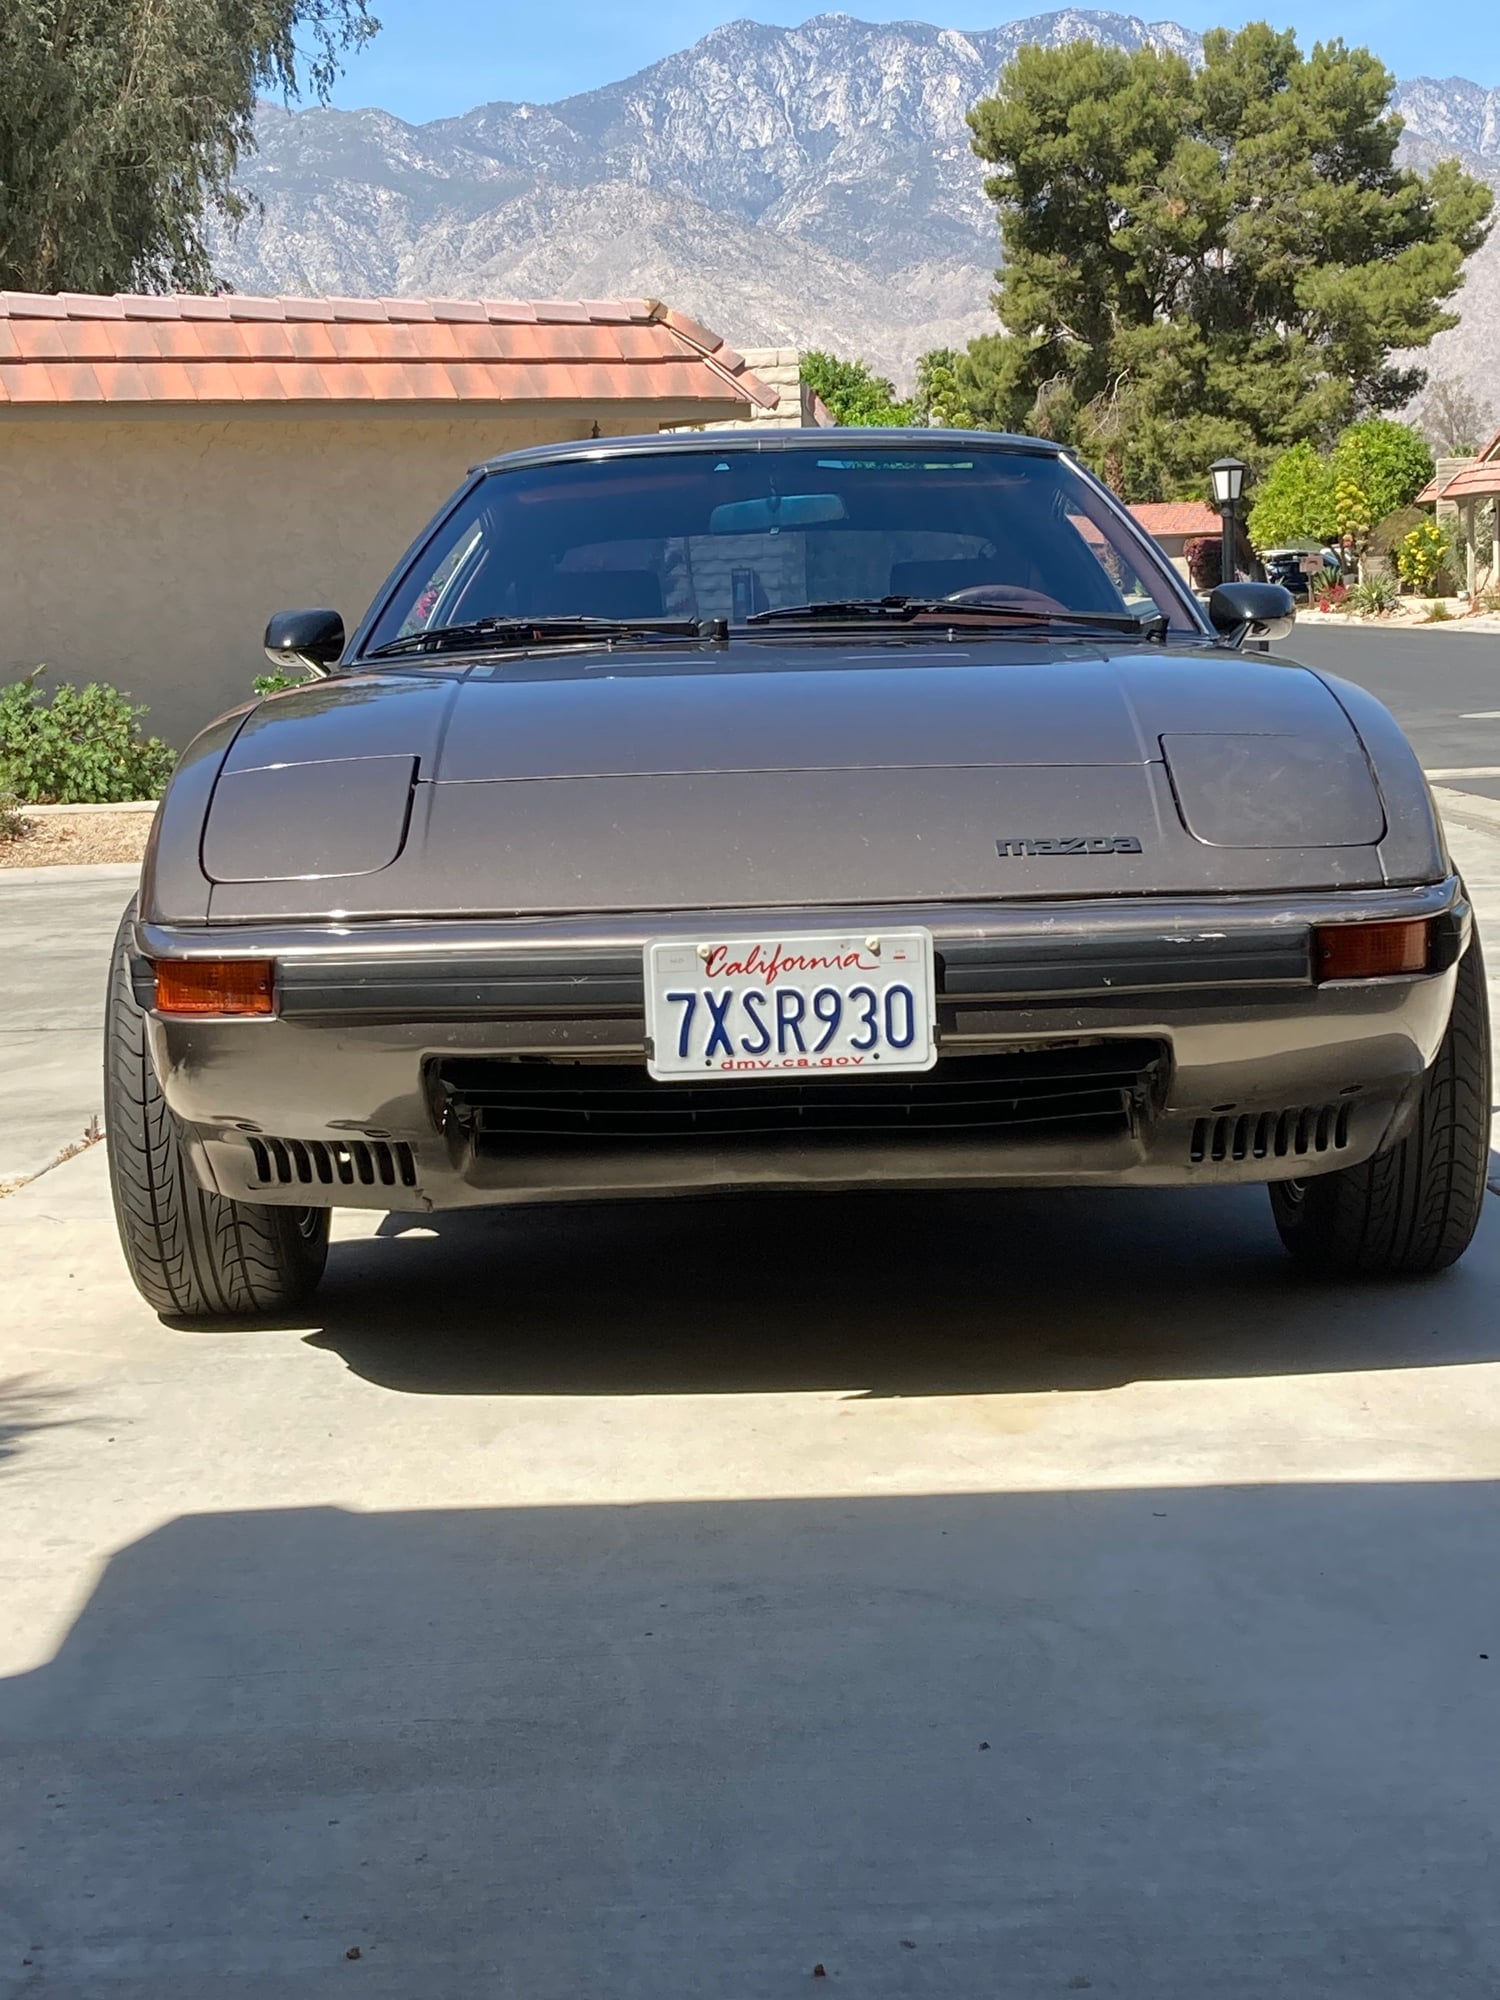 1985 Mazda RX-7 - 85 GSL-SE   Driven and maintained.  Honest car. No rust.  Super clean! - Used - VIN JM1FB3327F0886703 - 99,700 Miles - Other - 2WD - Manual - Hatchback - Brown - Cathedral City, CA 92234, United States